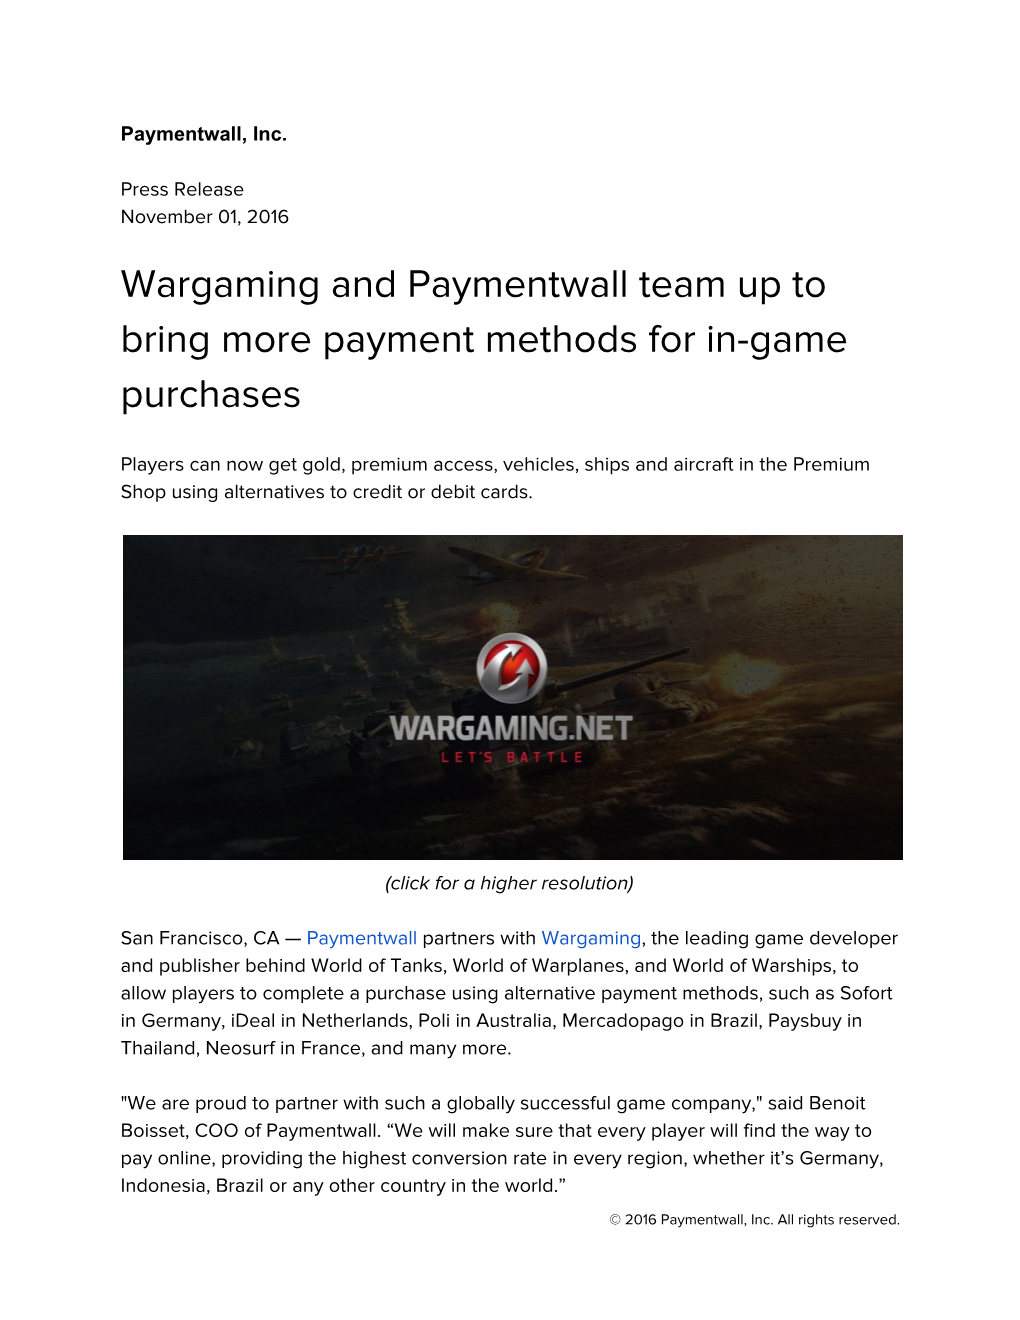 Wargaming and Paymentwall Team up to Bring More Payment Methods for In-Game Purchases